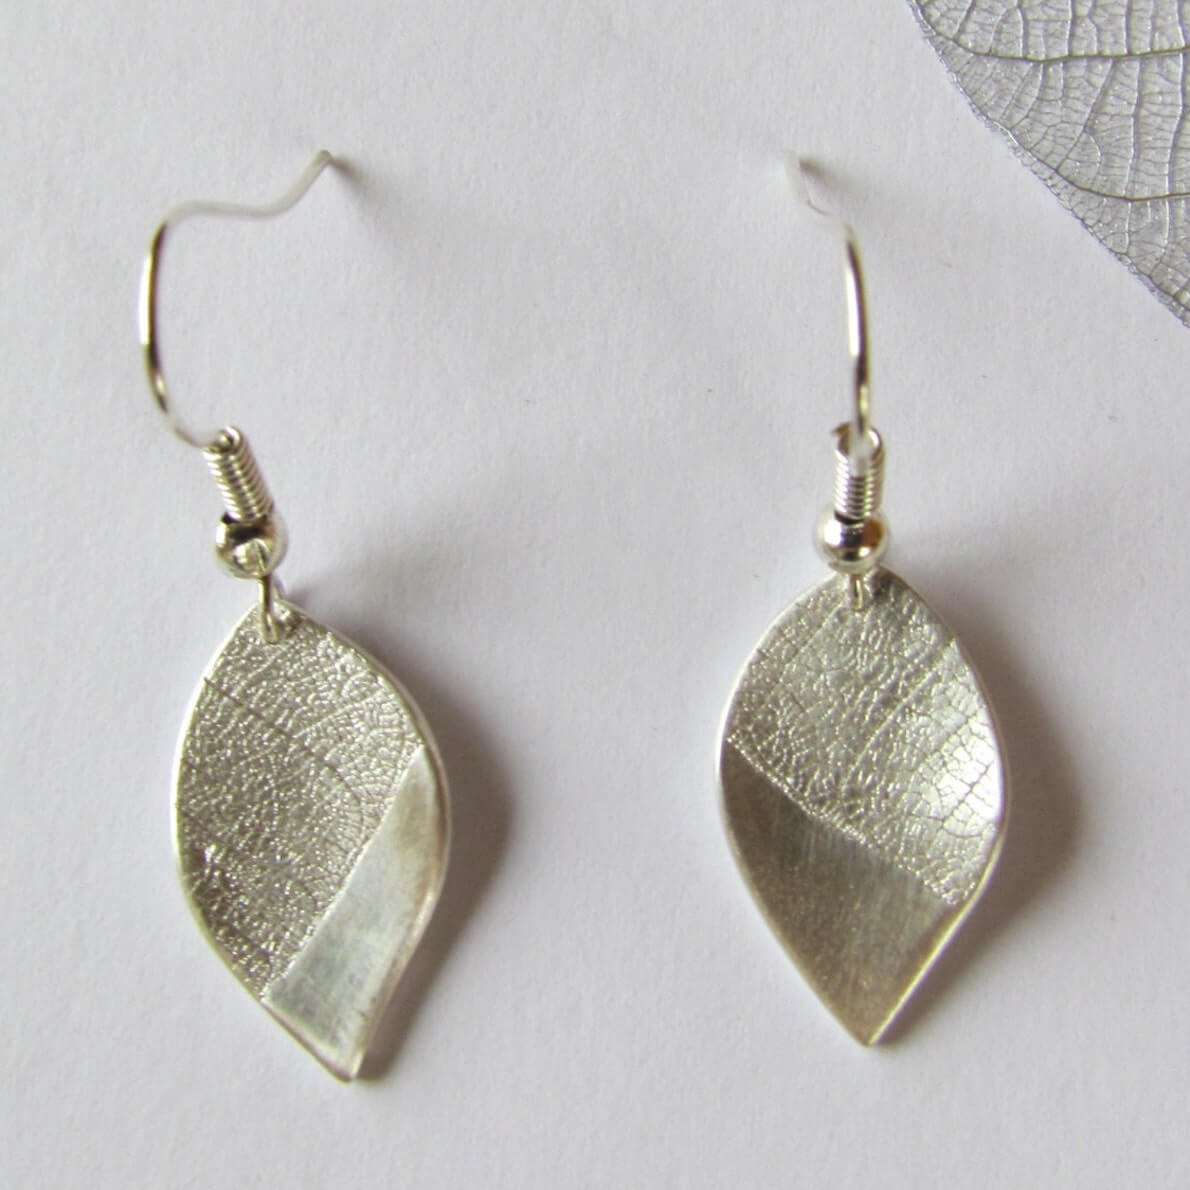 Image of Curved Silver Leaf Earrings made in the UK by Silverlines. Buying this product supports a UK business, jobs and the local community